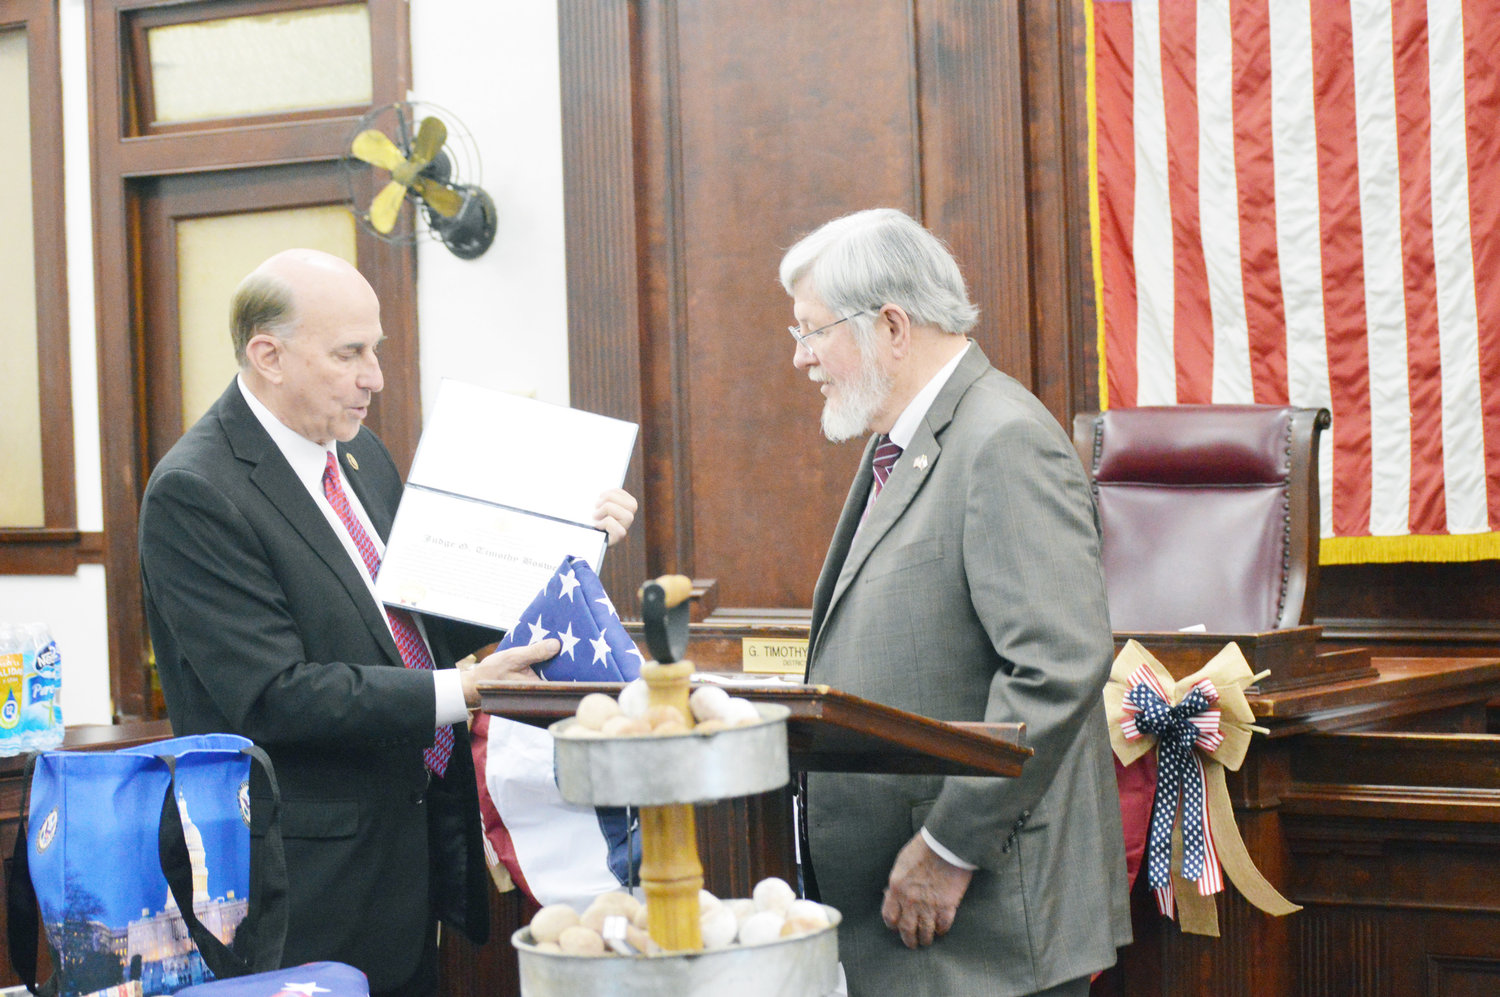 Judge Tim Boswell receives a flag which has flown over the capitol from Congressman Louie Gohmert.